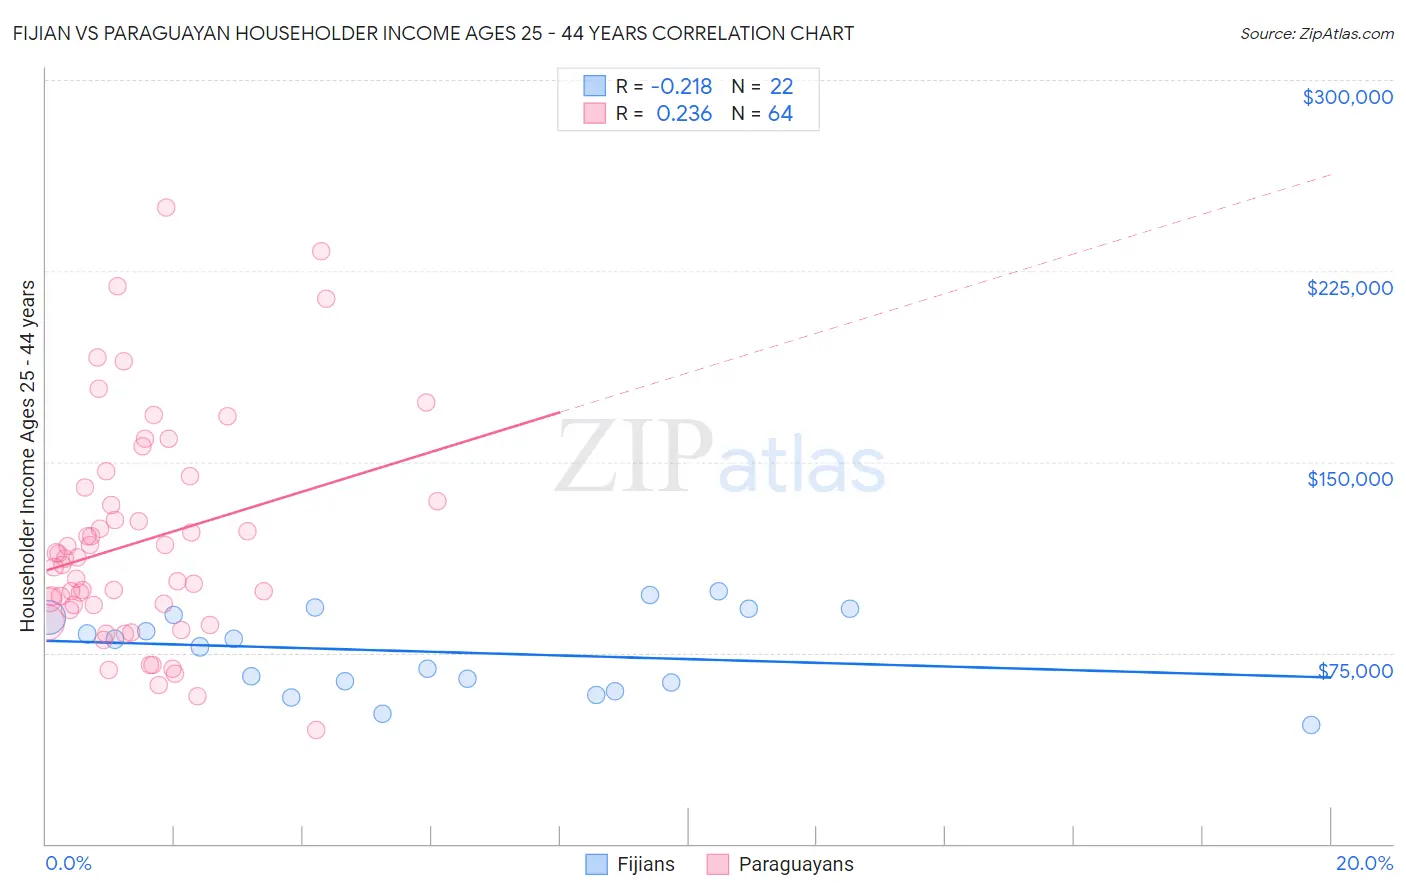 Fijian vs Paraguayan Householder Income Ages 25 - 44 years